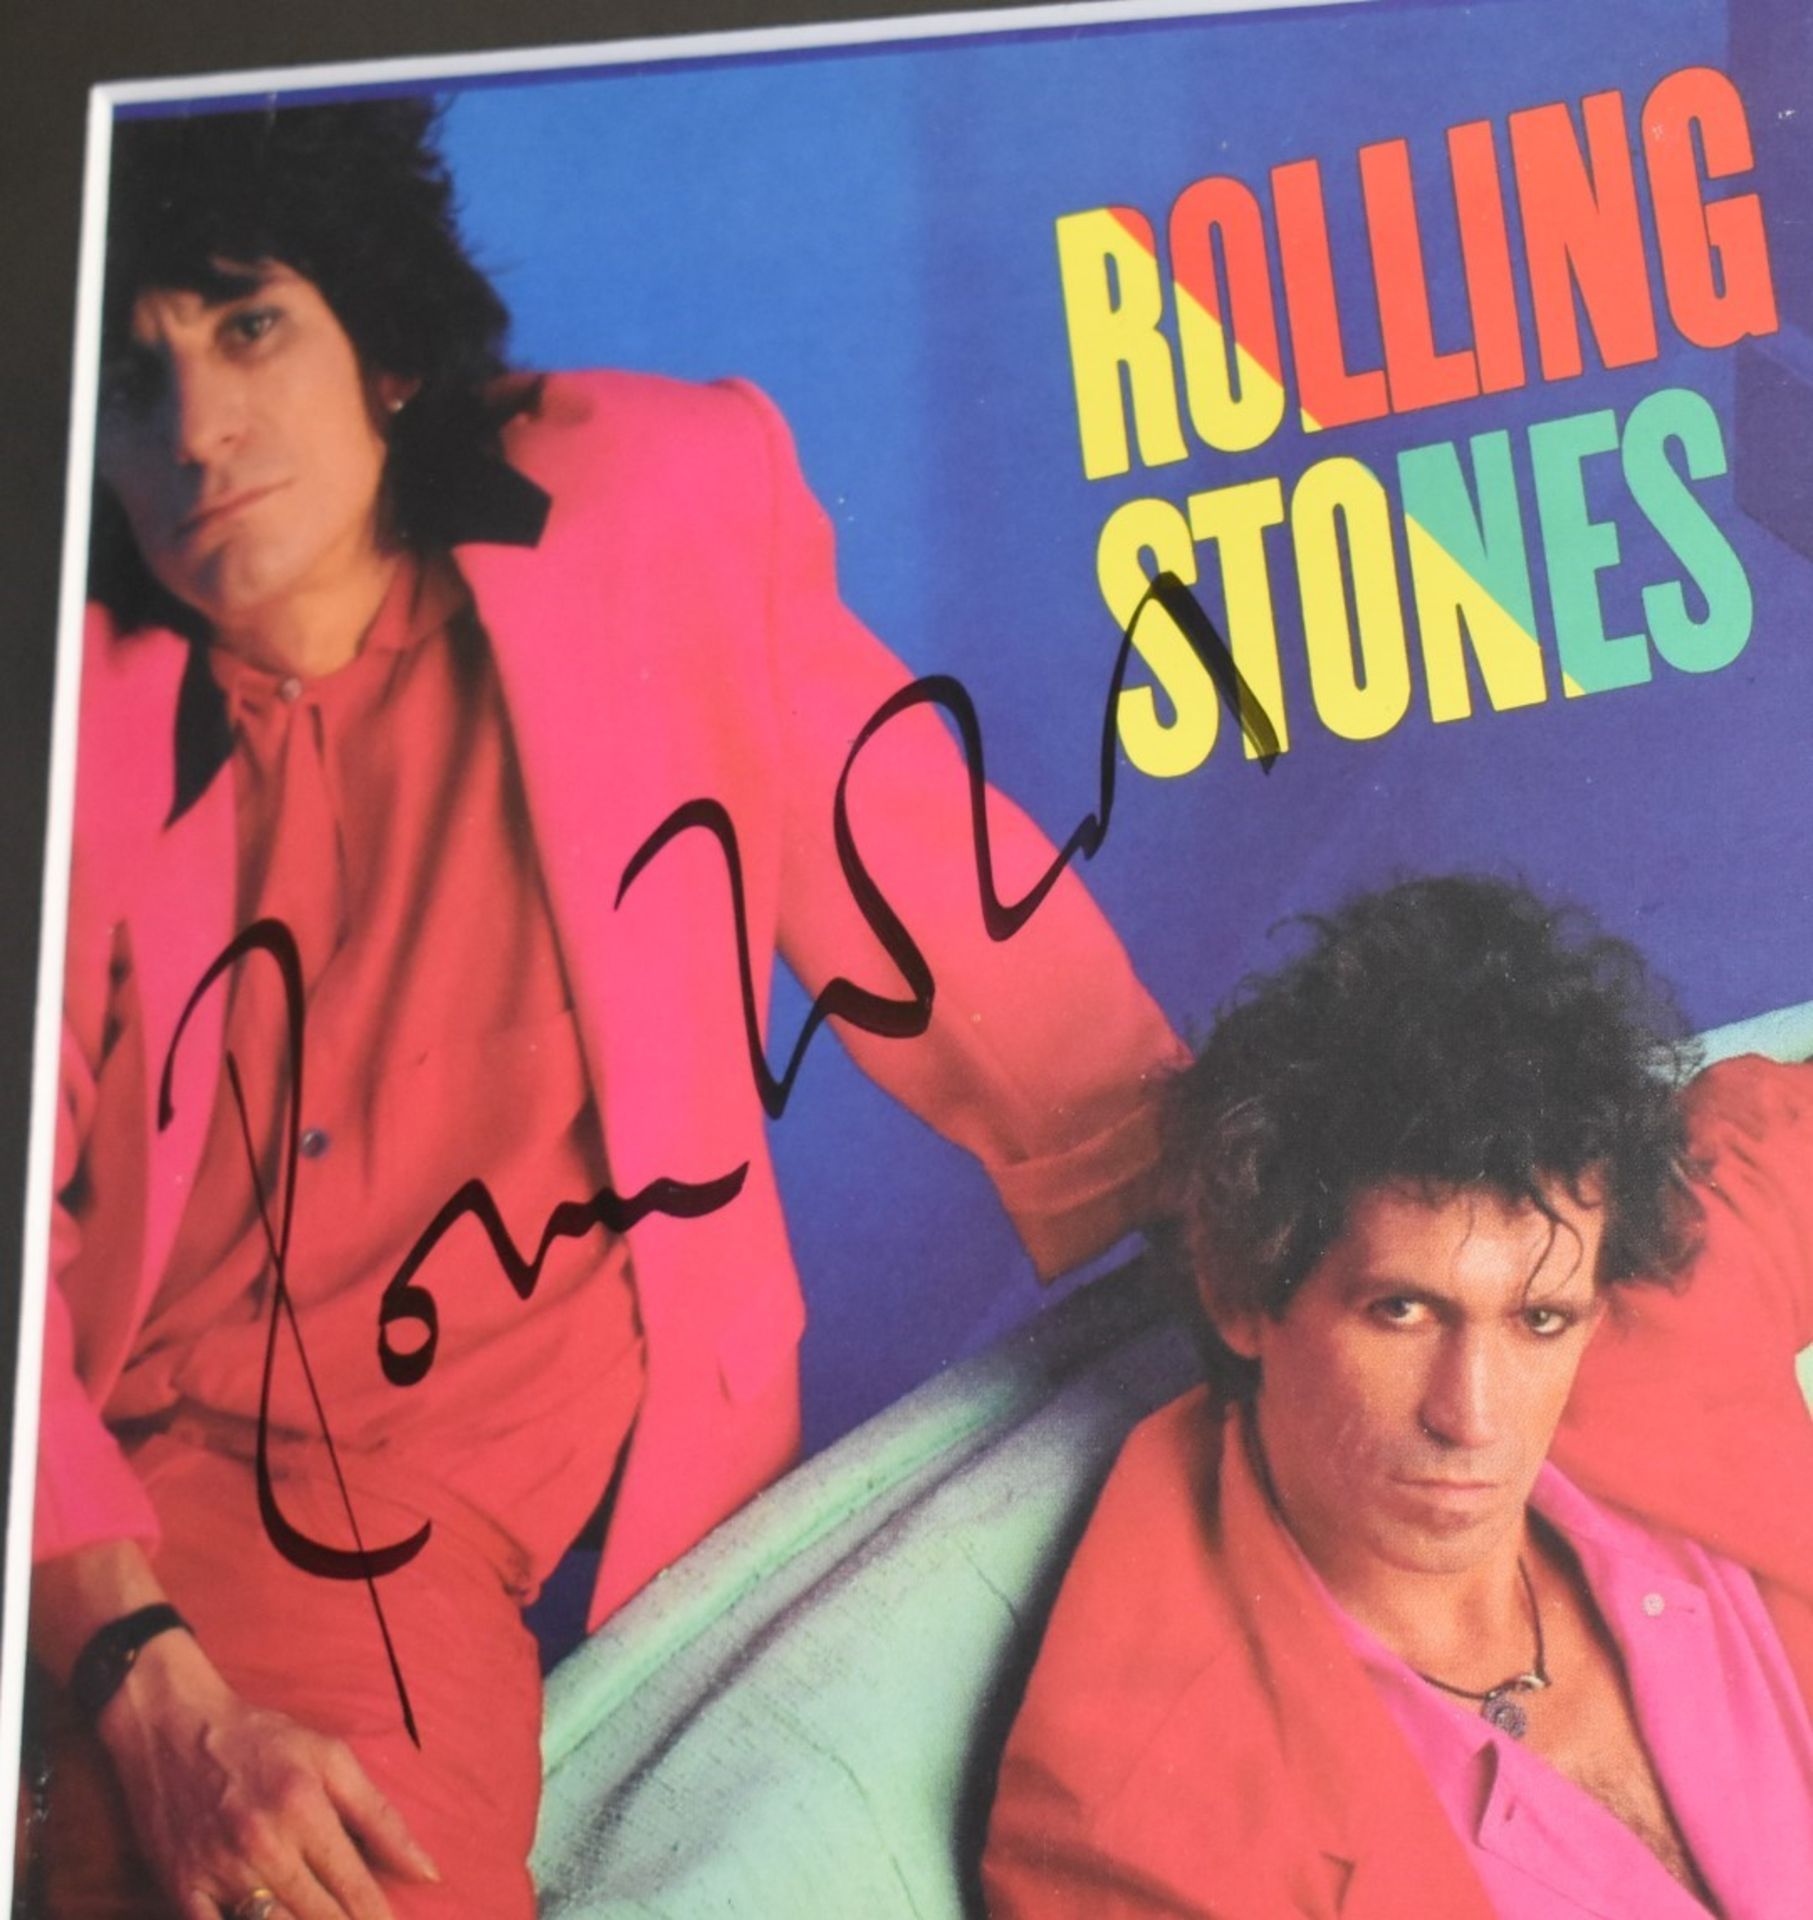 1 x Authentic ROLLING STONES Dirty Work Album Cover Signed By Jagger, Richards, Wood & Watts - Image 3 of 8